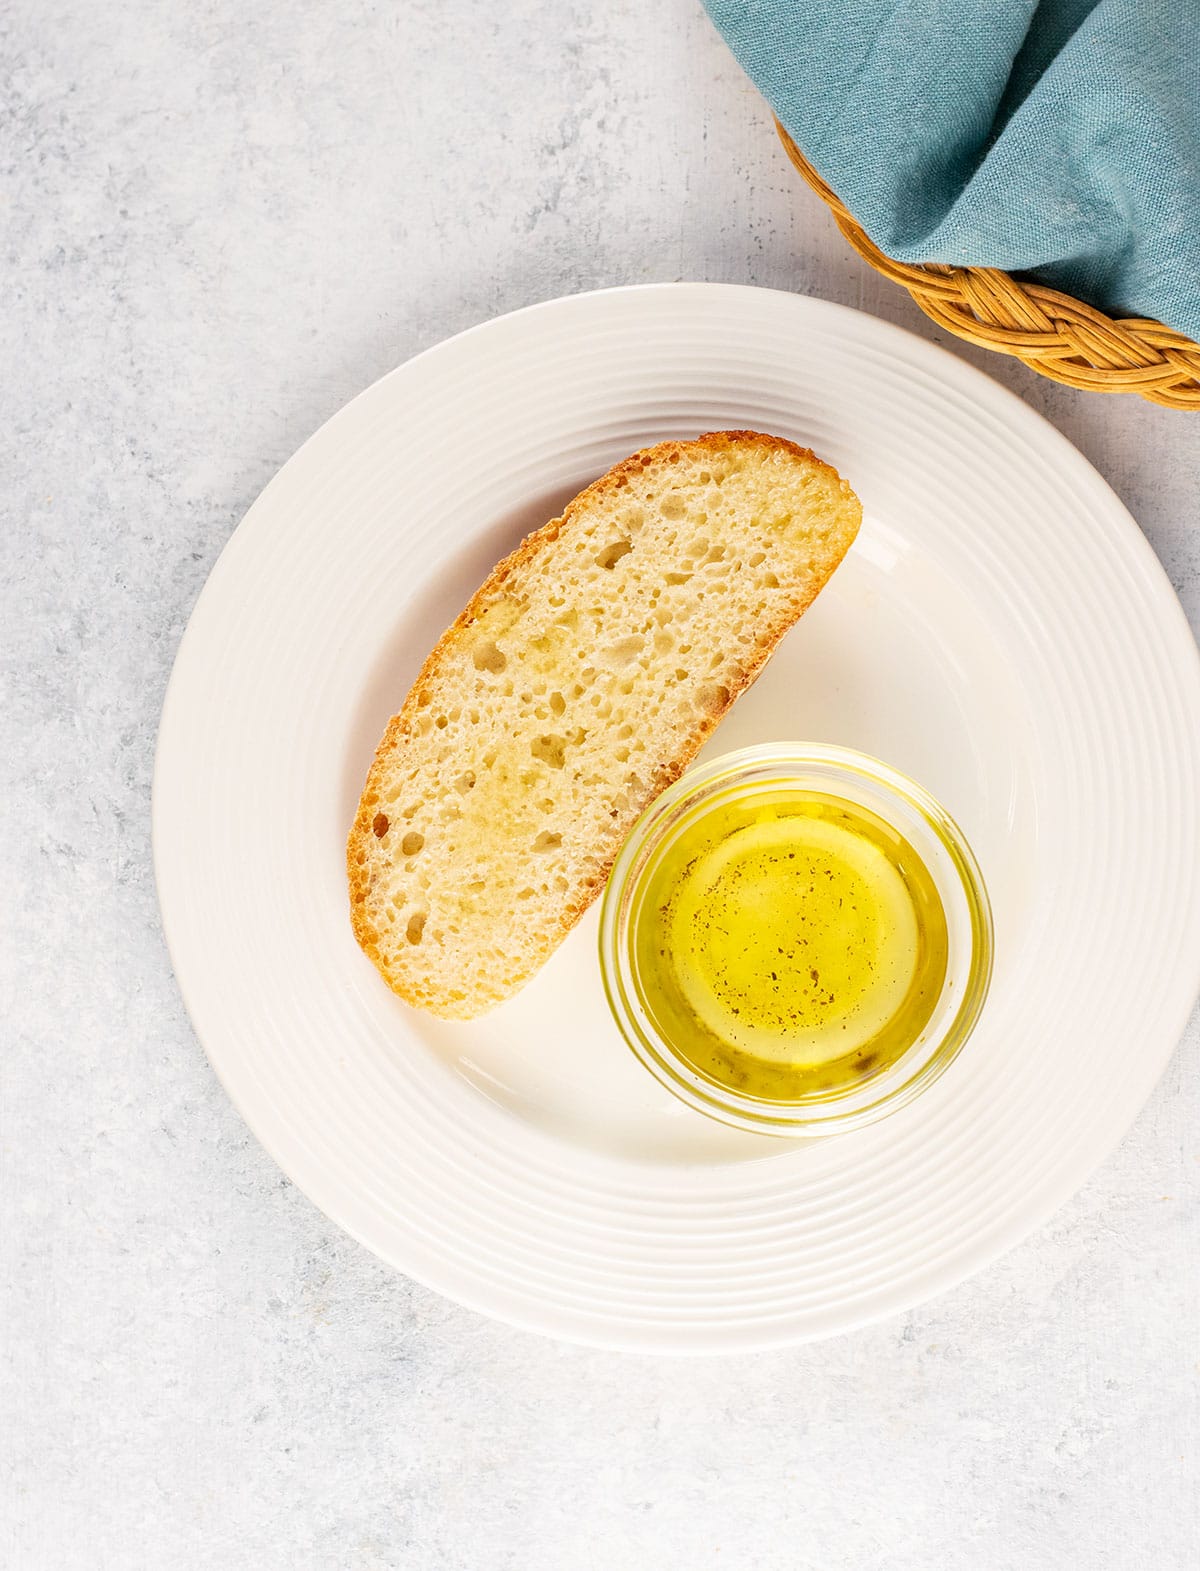 slice of italian bread on a plate with a cup of seasoned oil